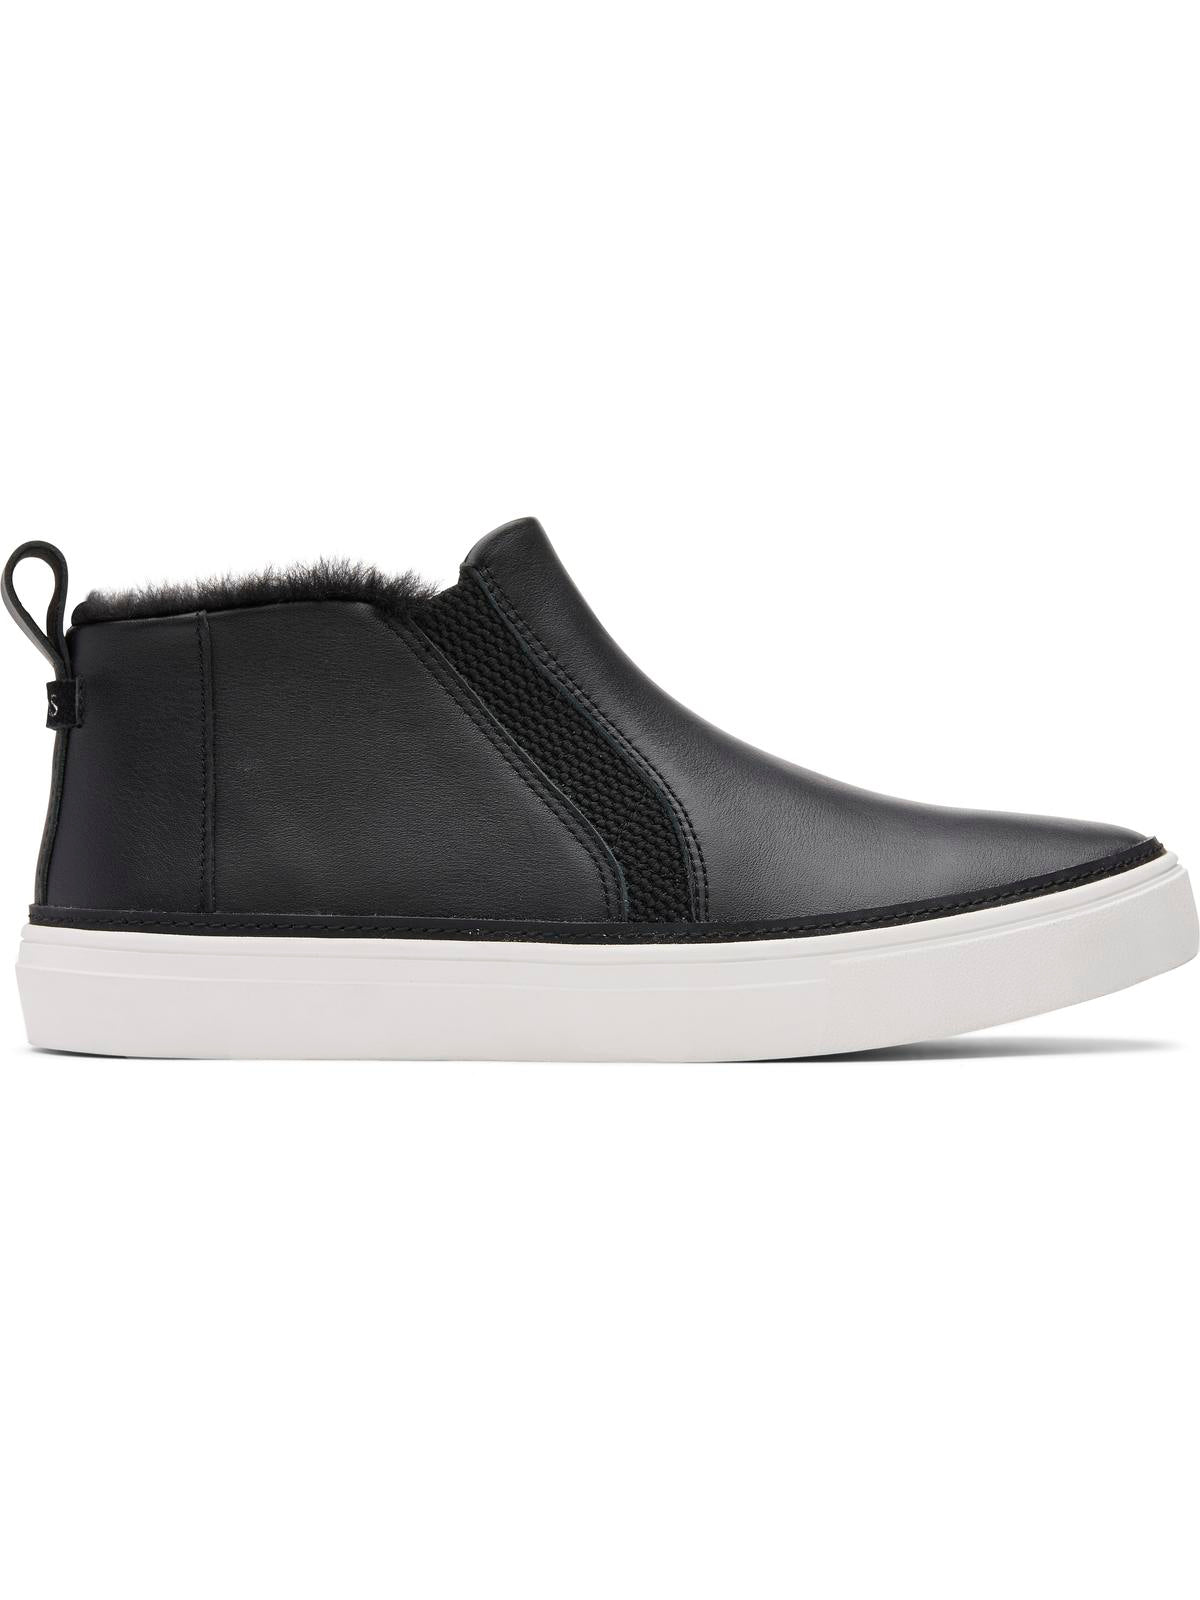 Shop Toms Bryce Womens Leather Pull On Casual And Fashion Sneakers In Black